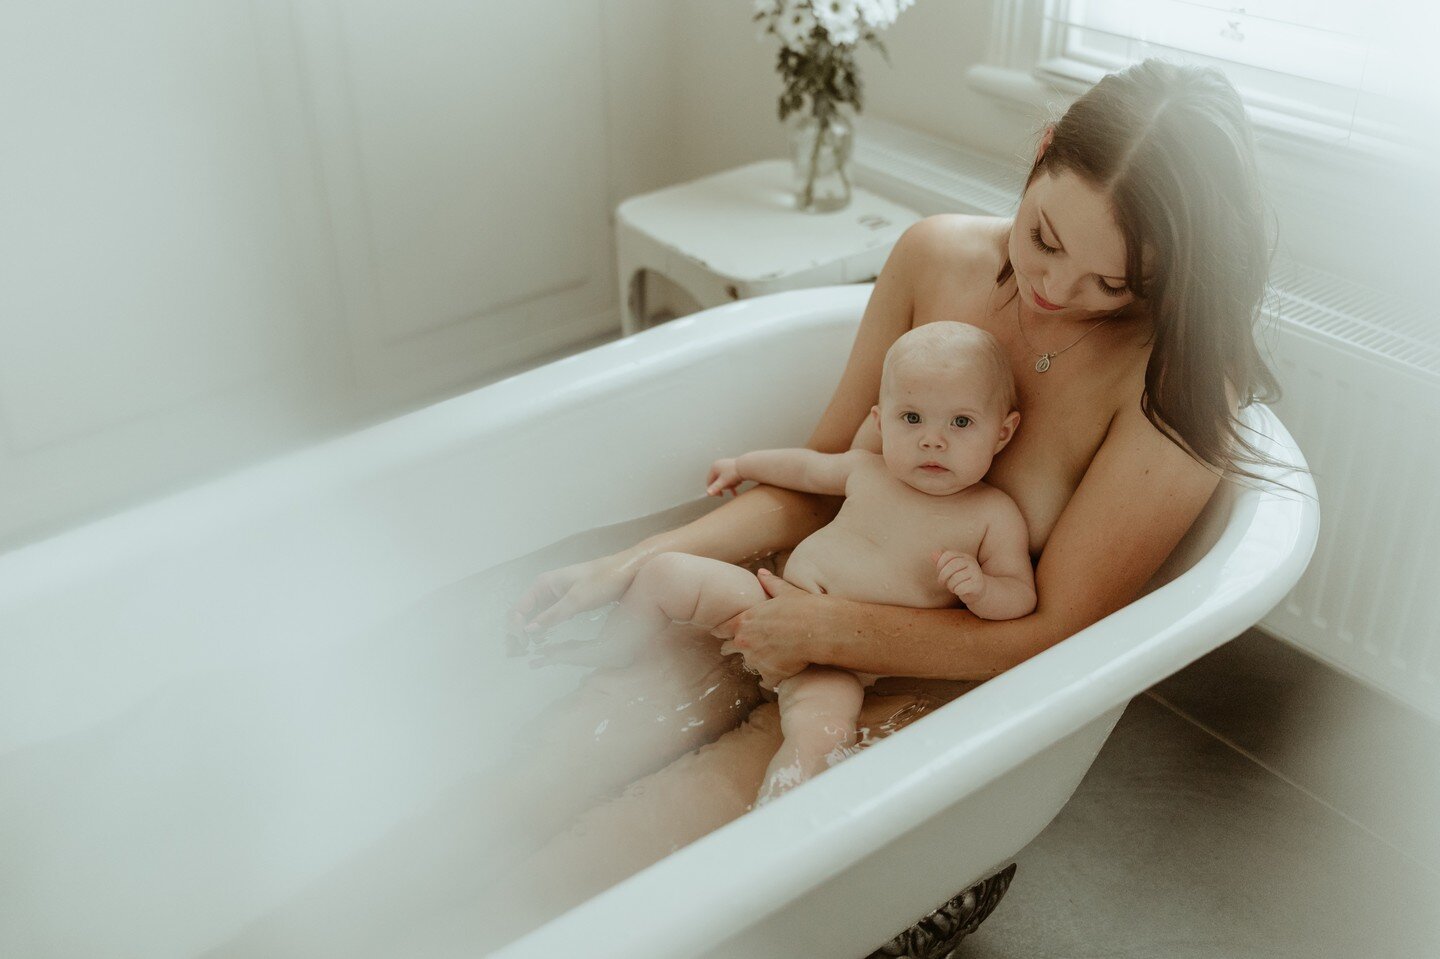 Kayla &amp; Willa's intimate motherhood sessions has been posted to my website. A beautiful raw session captured perfectly at @dubuquebedandbreakfast
See my stories for a direct link.